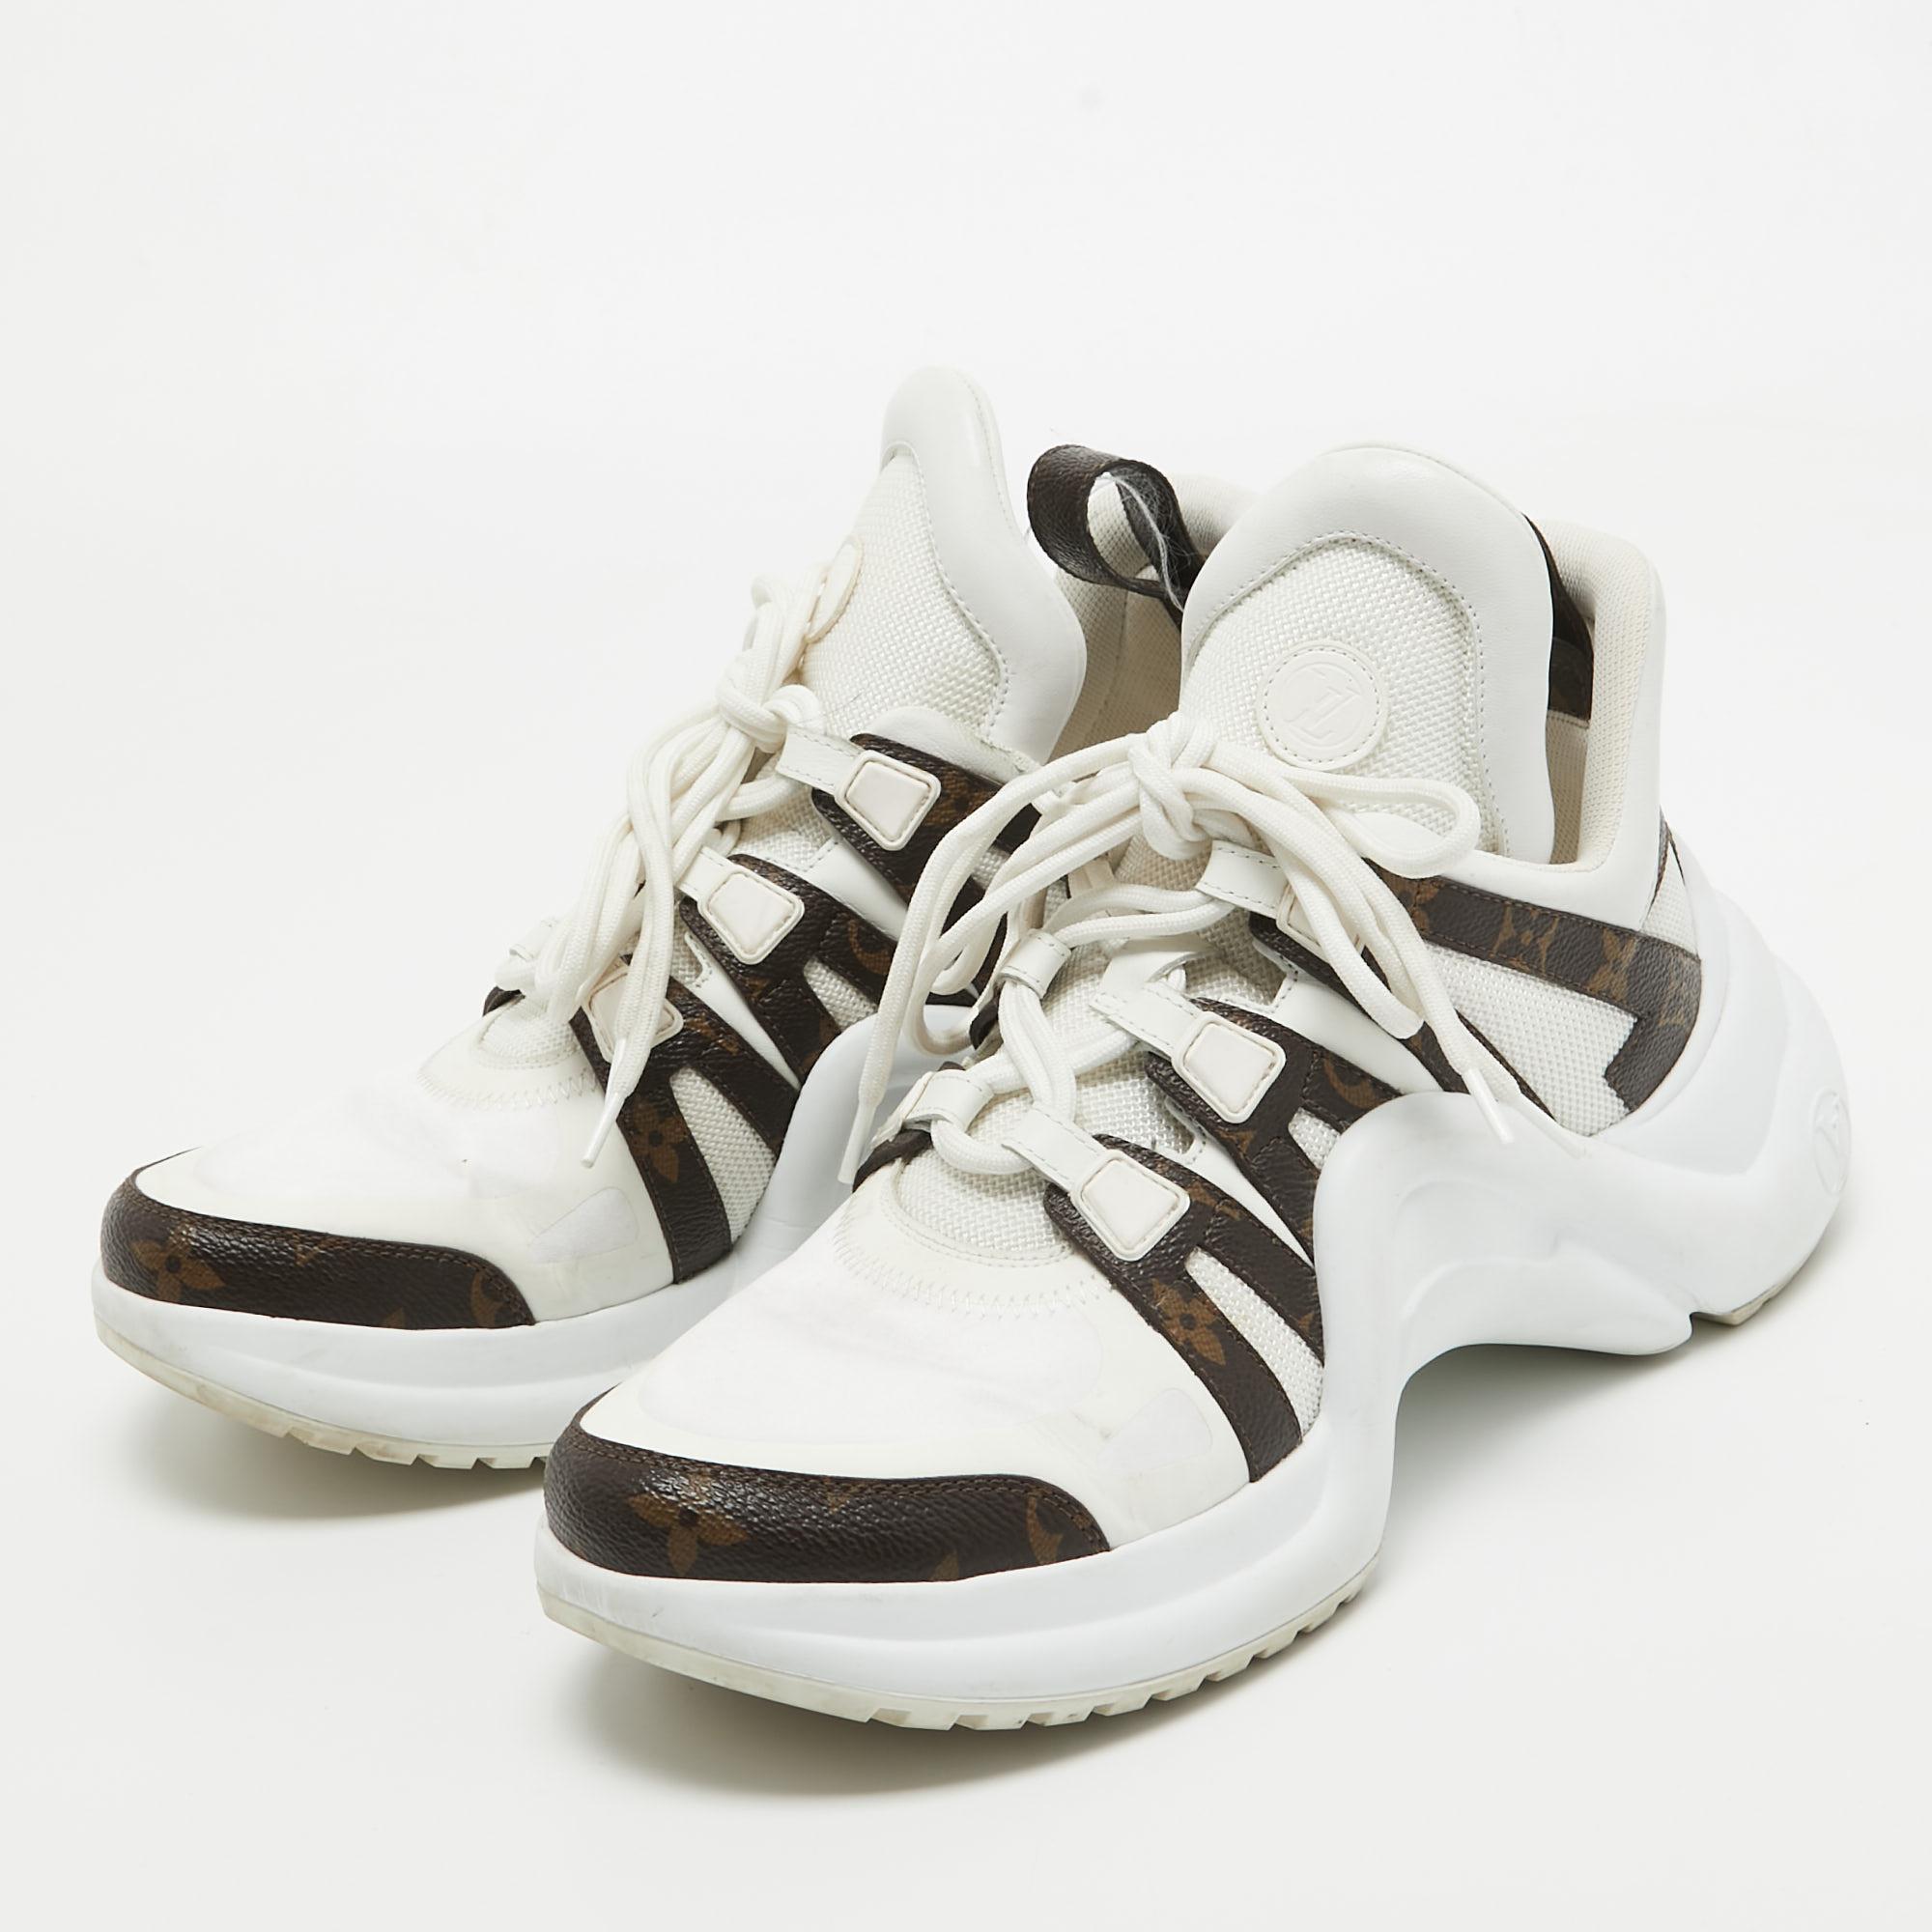 Louis Vuitton White/Brown Nylon and Monogram Canvas Archlight Sneakers Size 41 For Sale 3